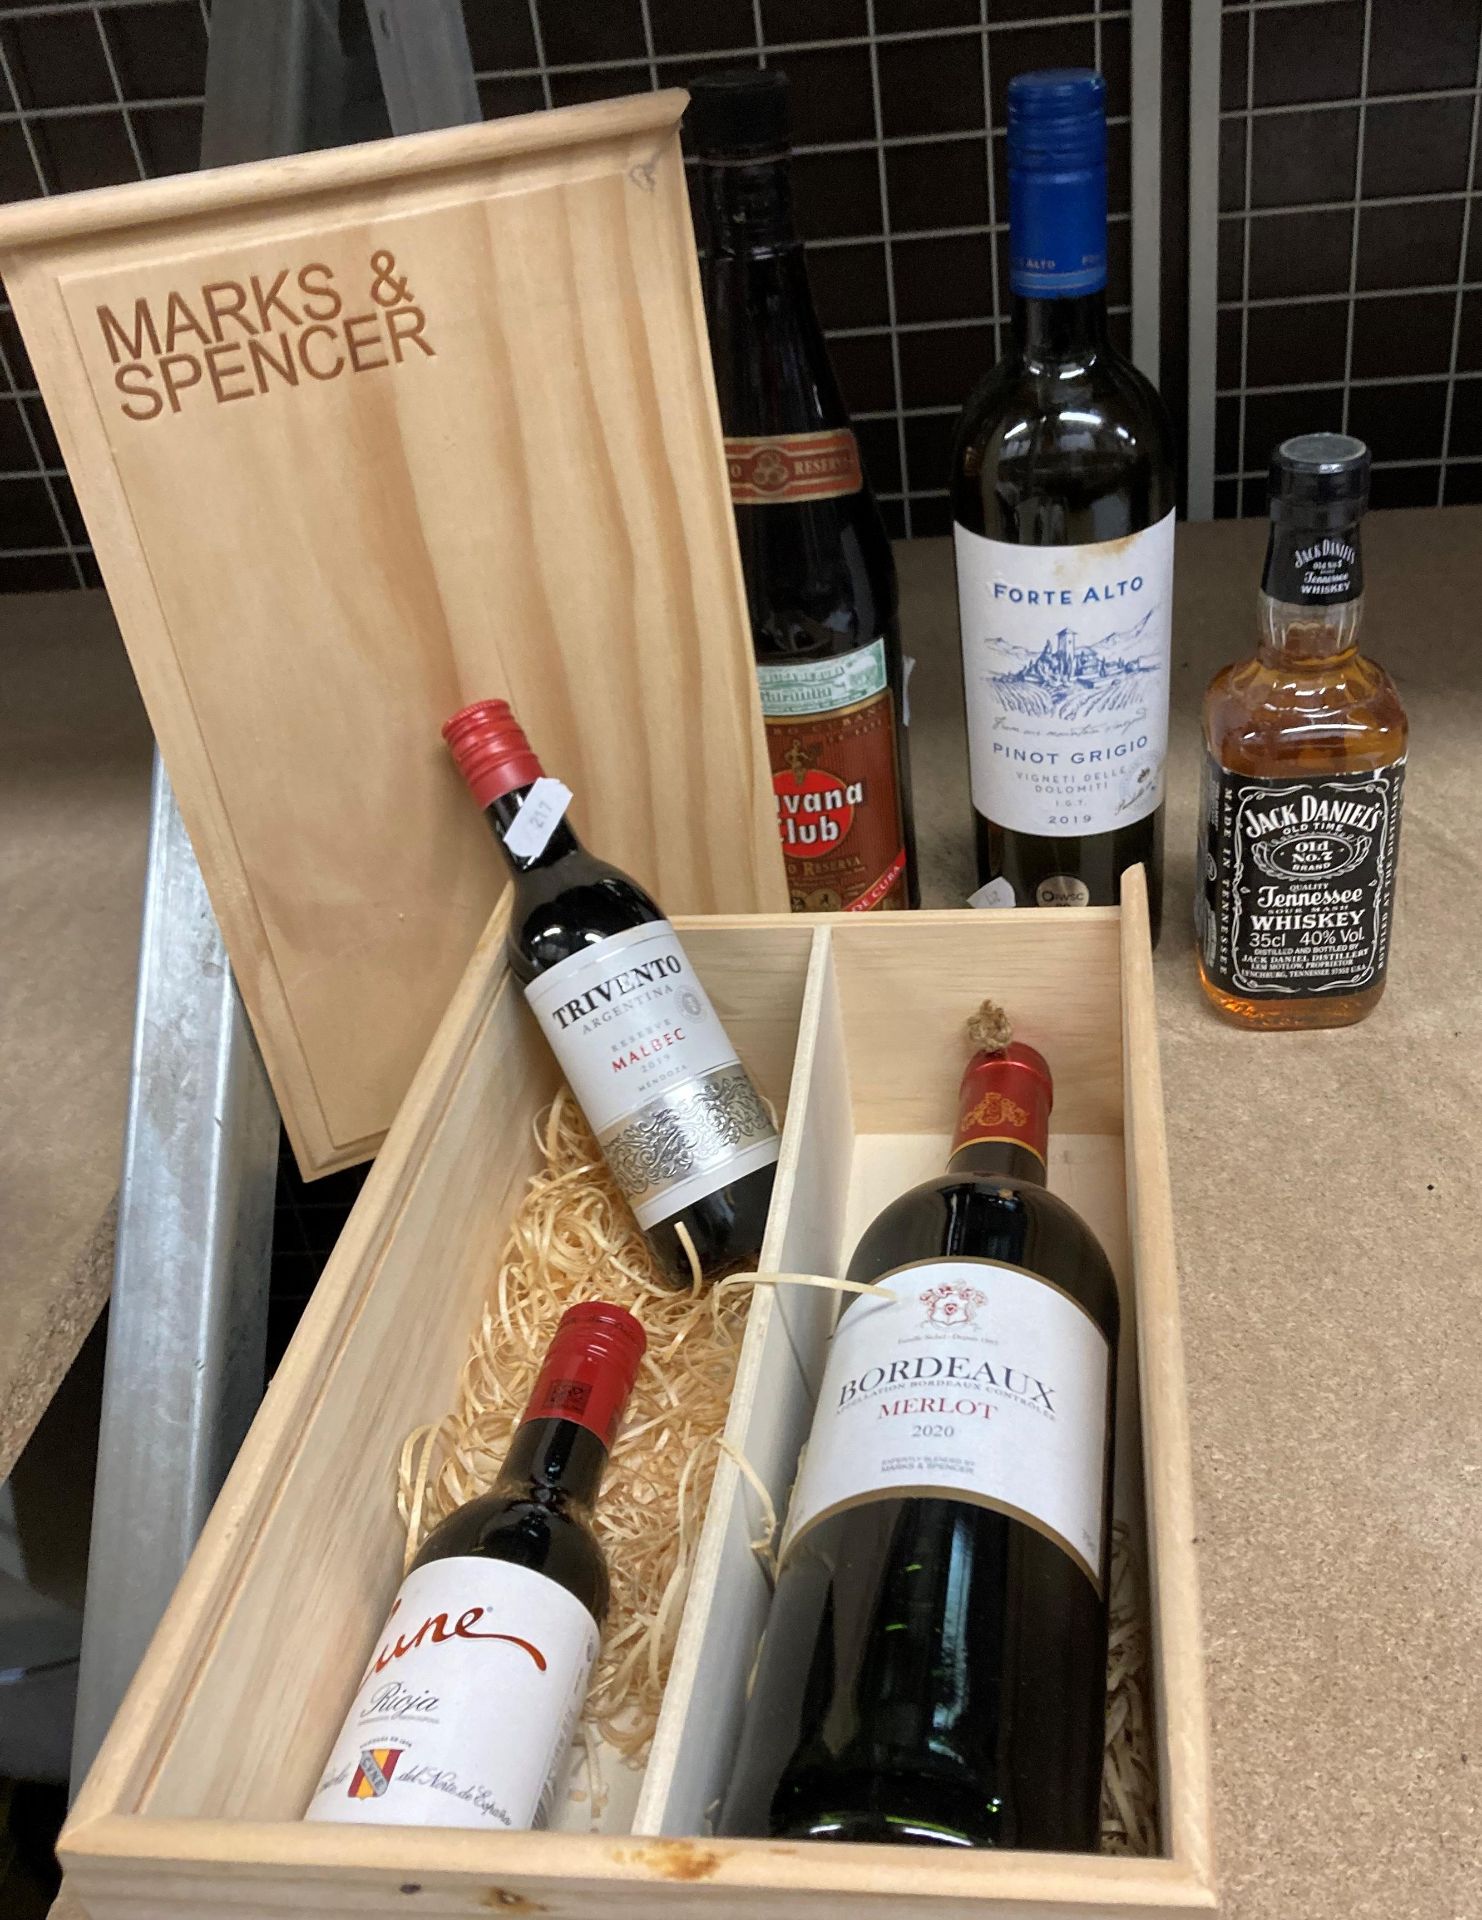 A Marks & Spencer gift set in wood box containing a 2020 bottle of Bordeaux Merlot and two 18.